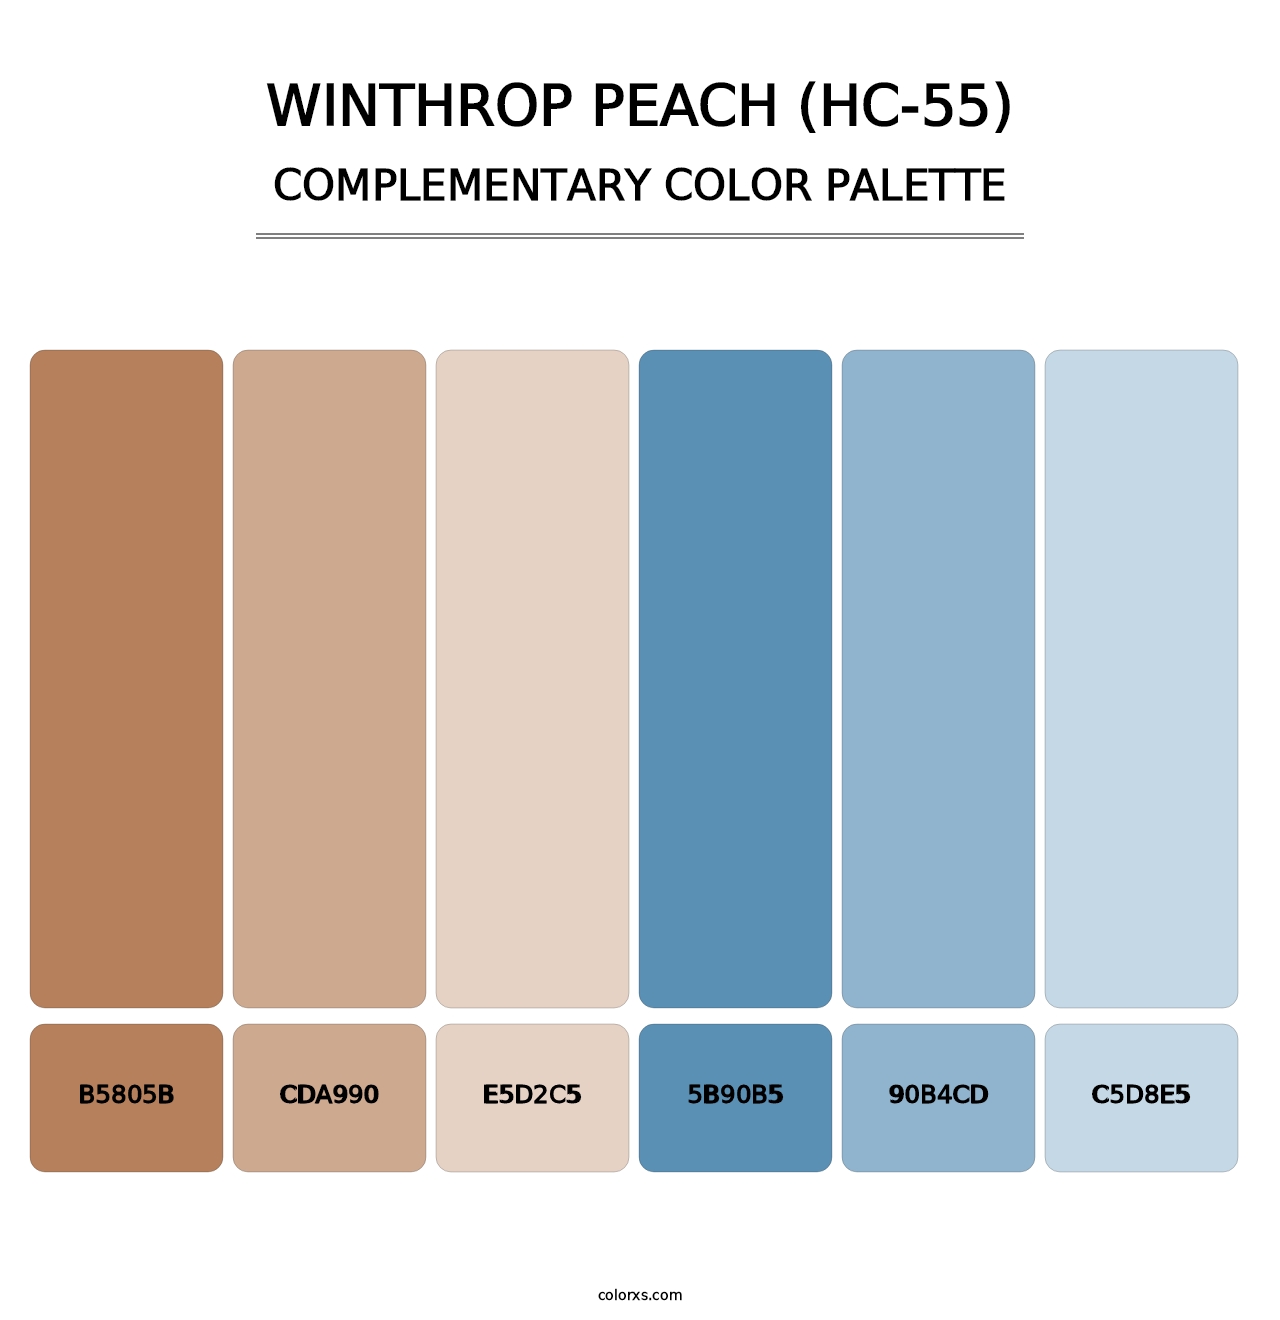 Winthrop Peach (HC-55) - Complementary Color Palette